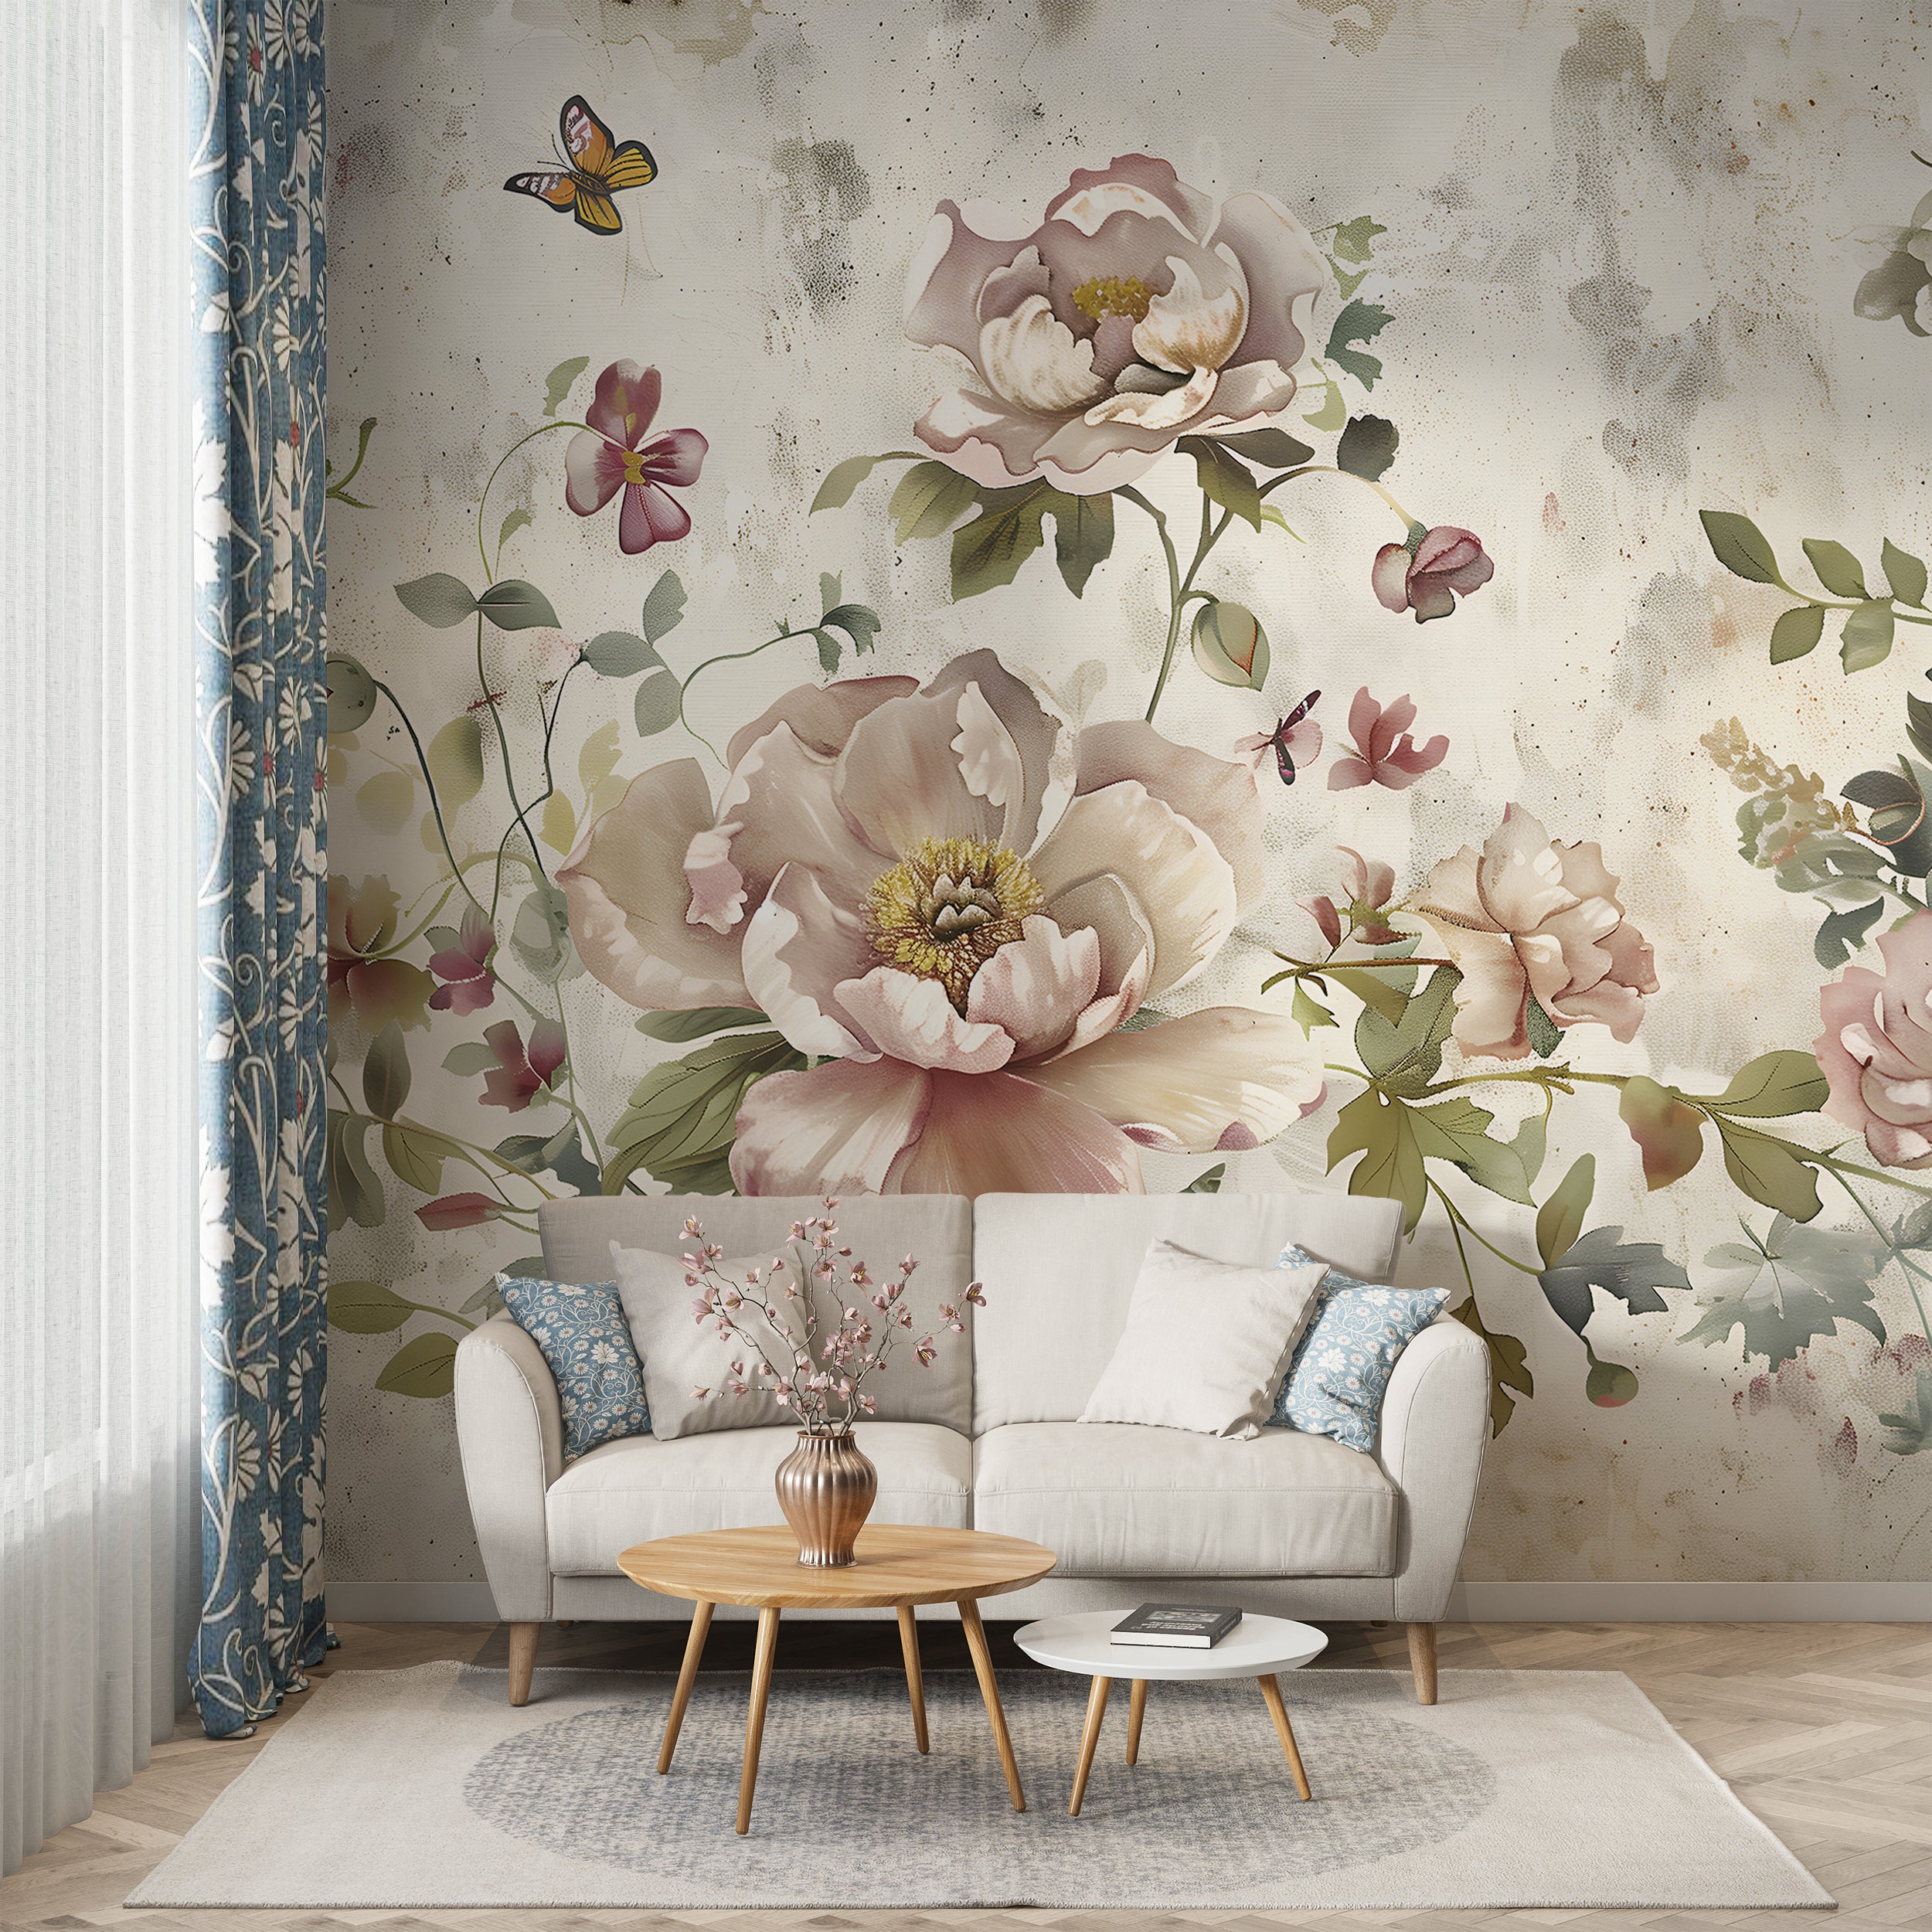 Large Flowers Wall Mural, Peel and Stick Floral Wallpaper, Beige Flowers and Butterflies Mural, Pink Flowers and Green Leaves Wall Decor